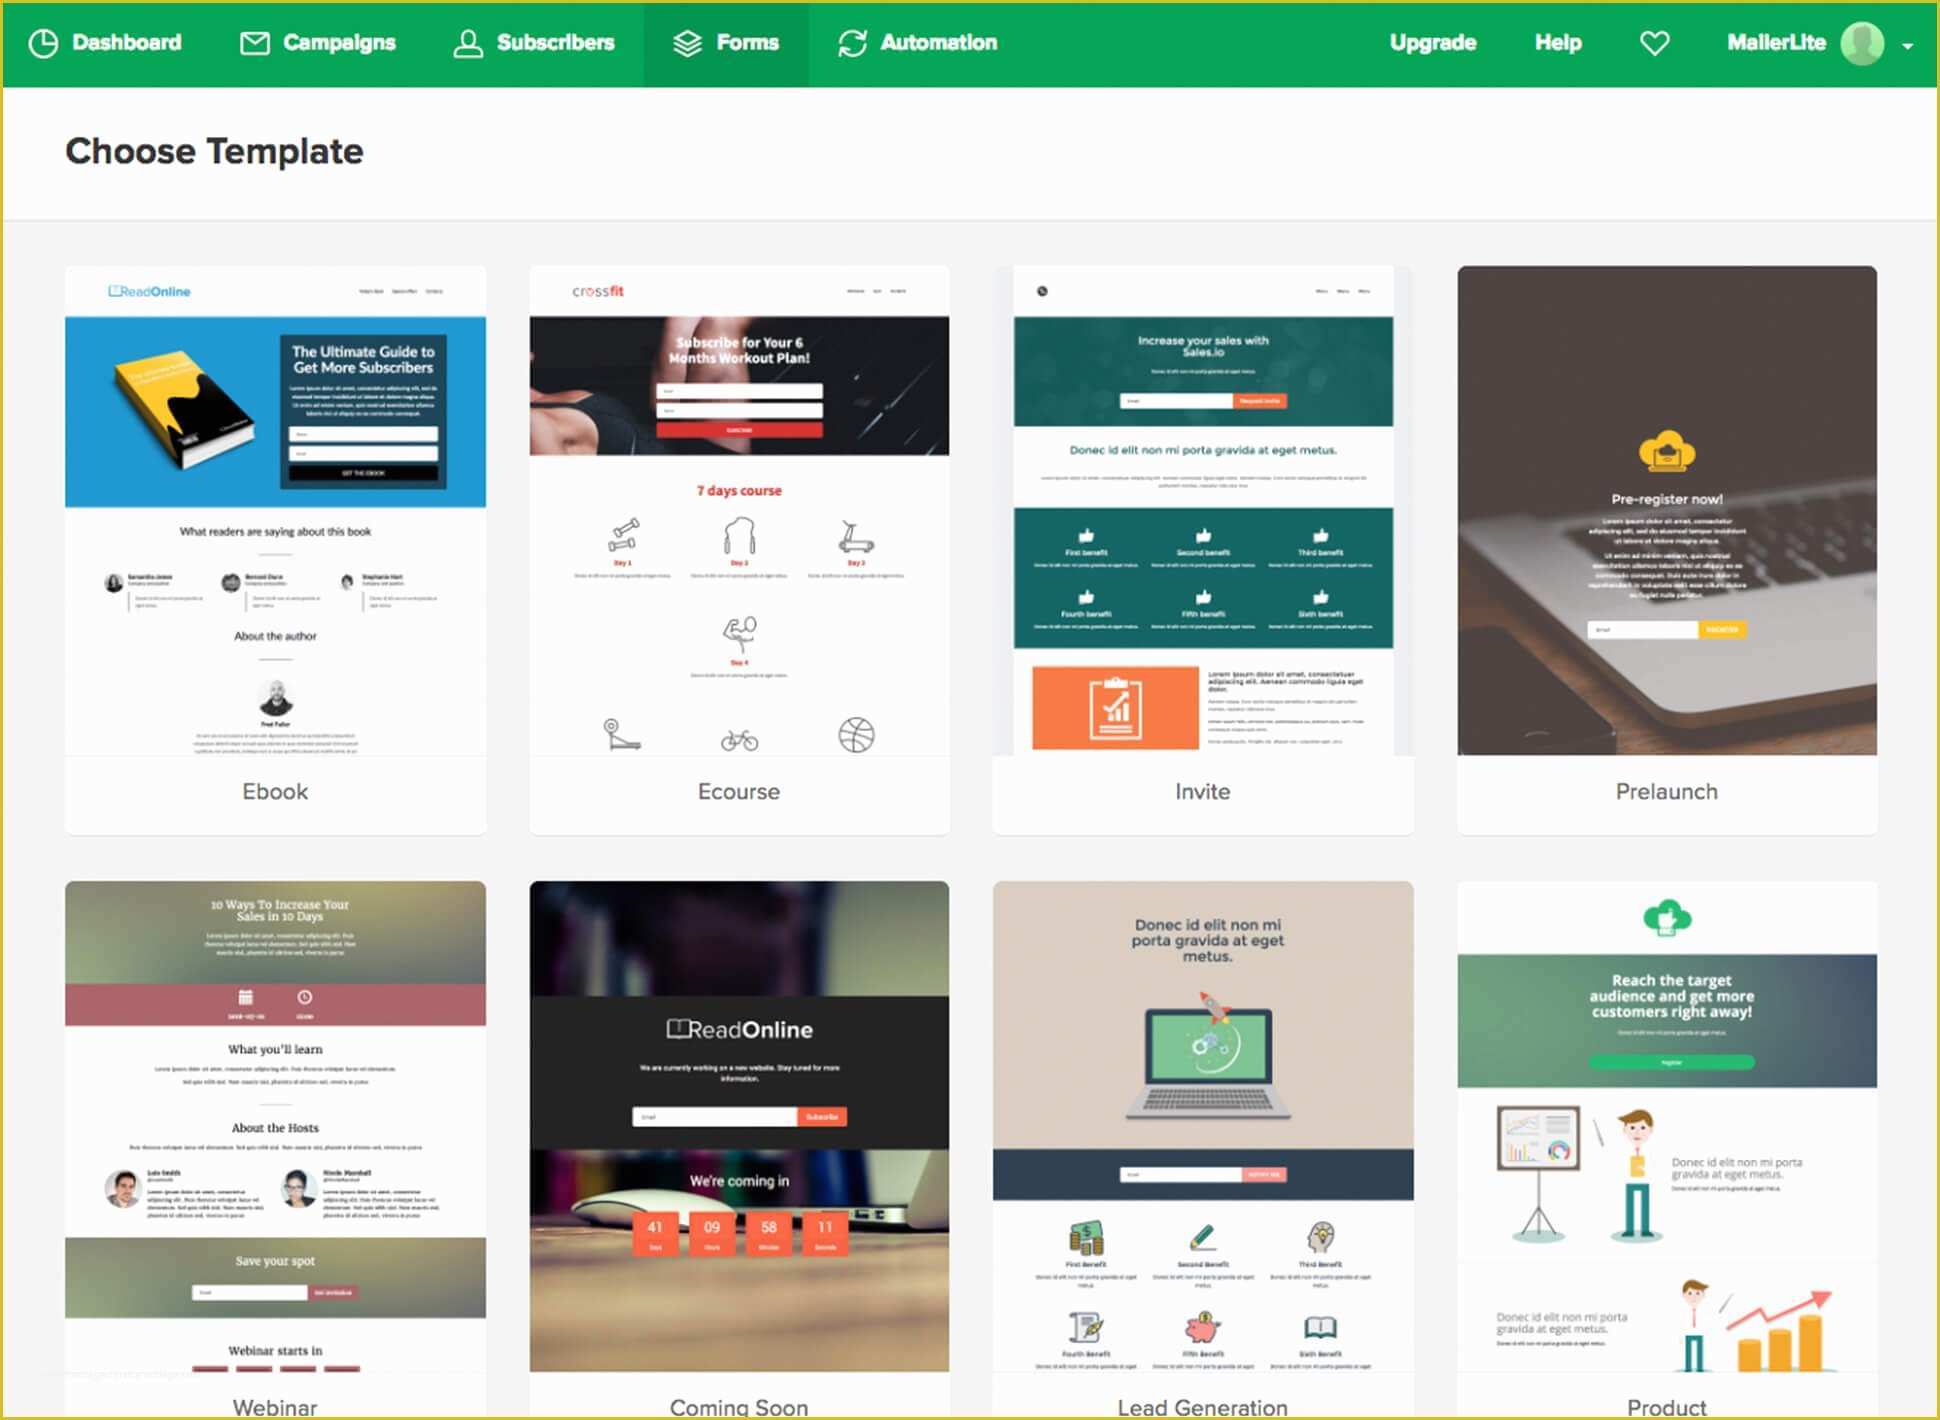 Free Video Landing Page Templates Of Landing Page Builder Drag and Drop Editor Mailerlite